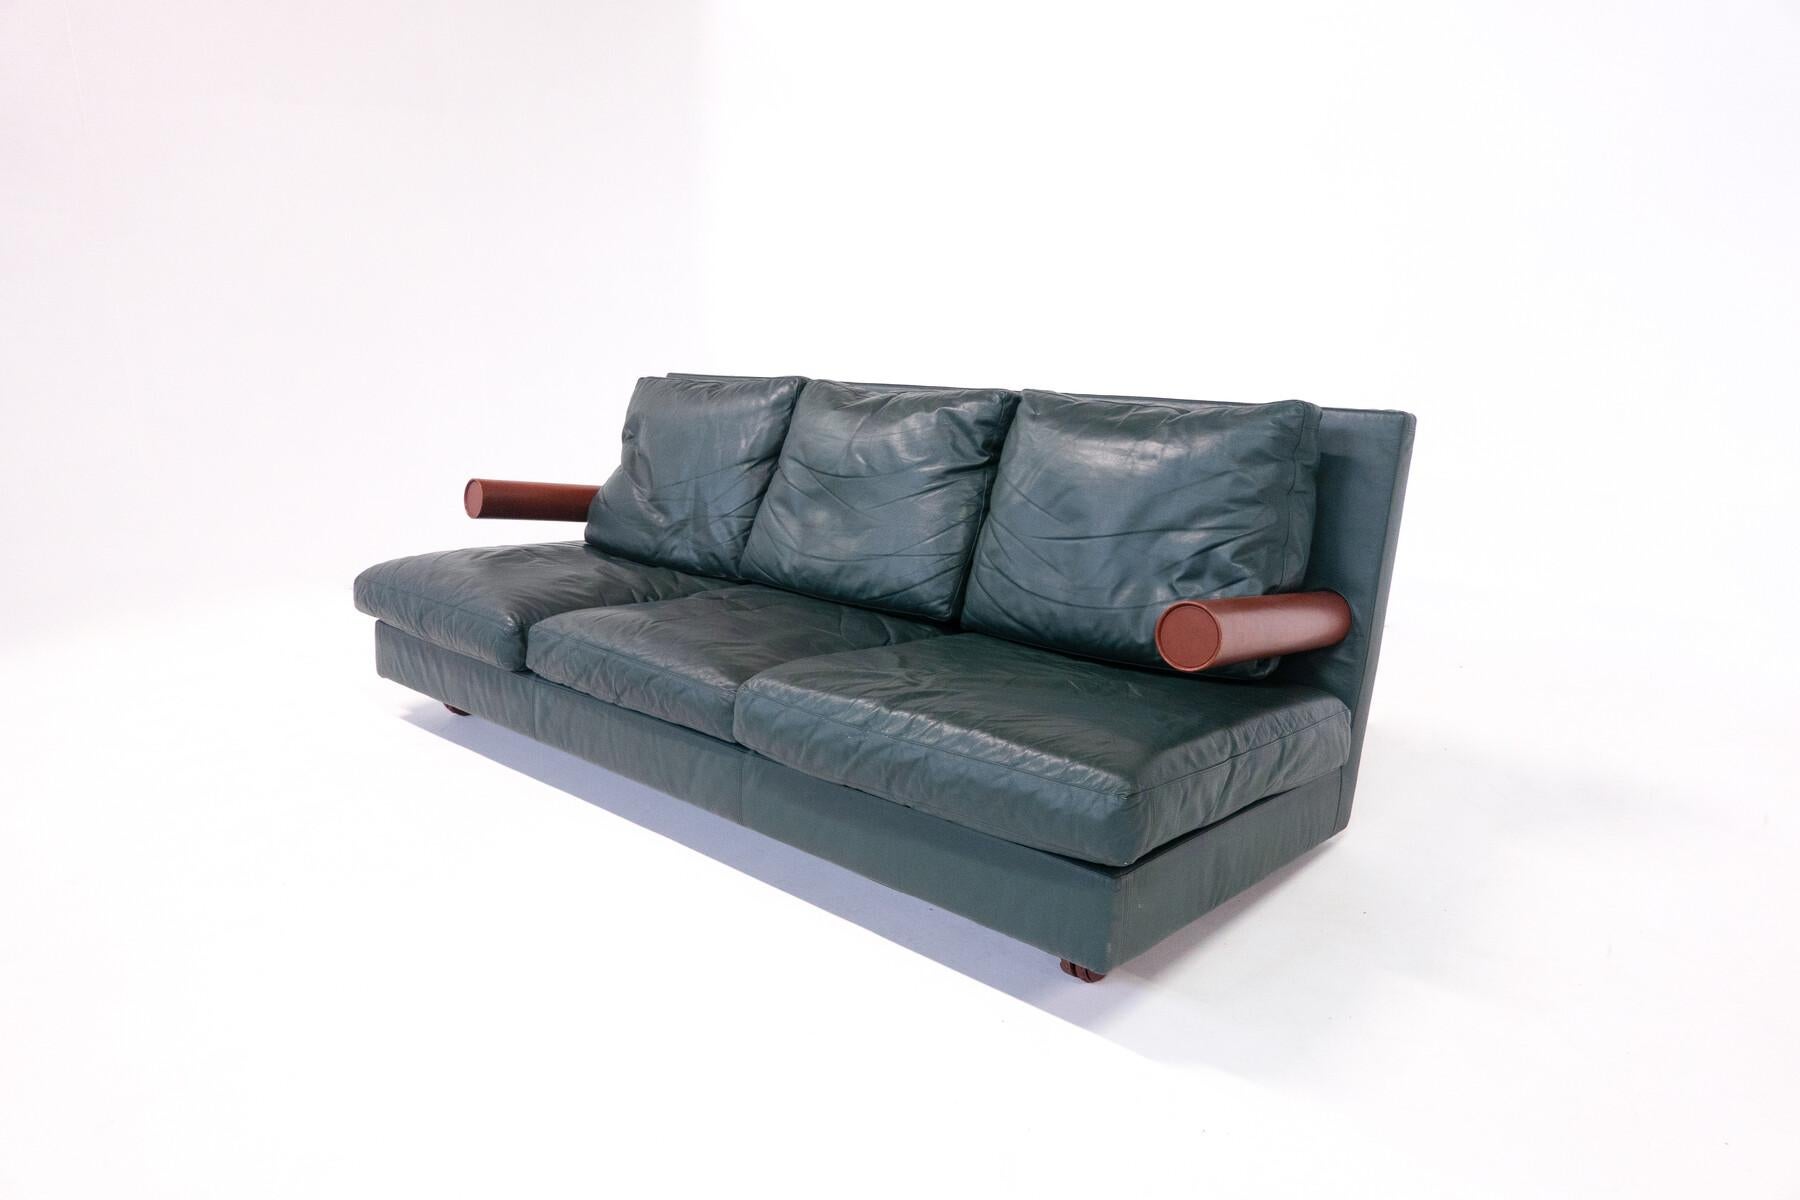 Late 20th Century Mid-Century Modern Baisity Sofa by Antonio Citterio for B&B Italia, 1980s, Two For Sale